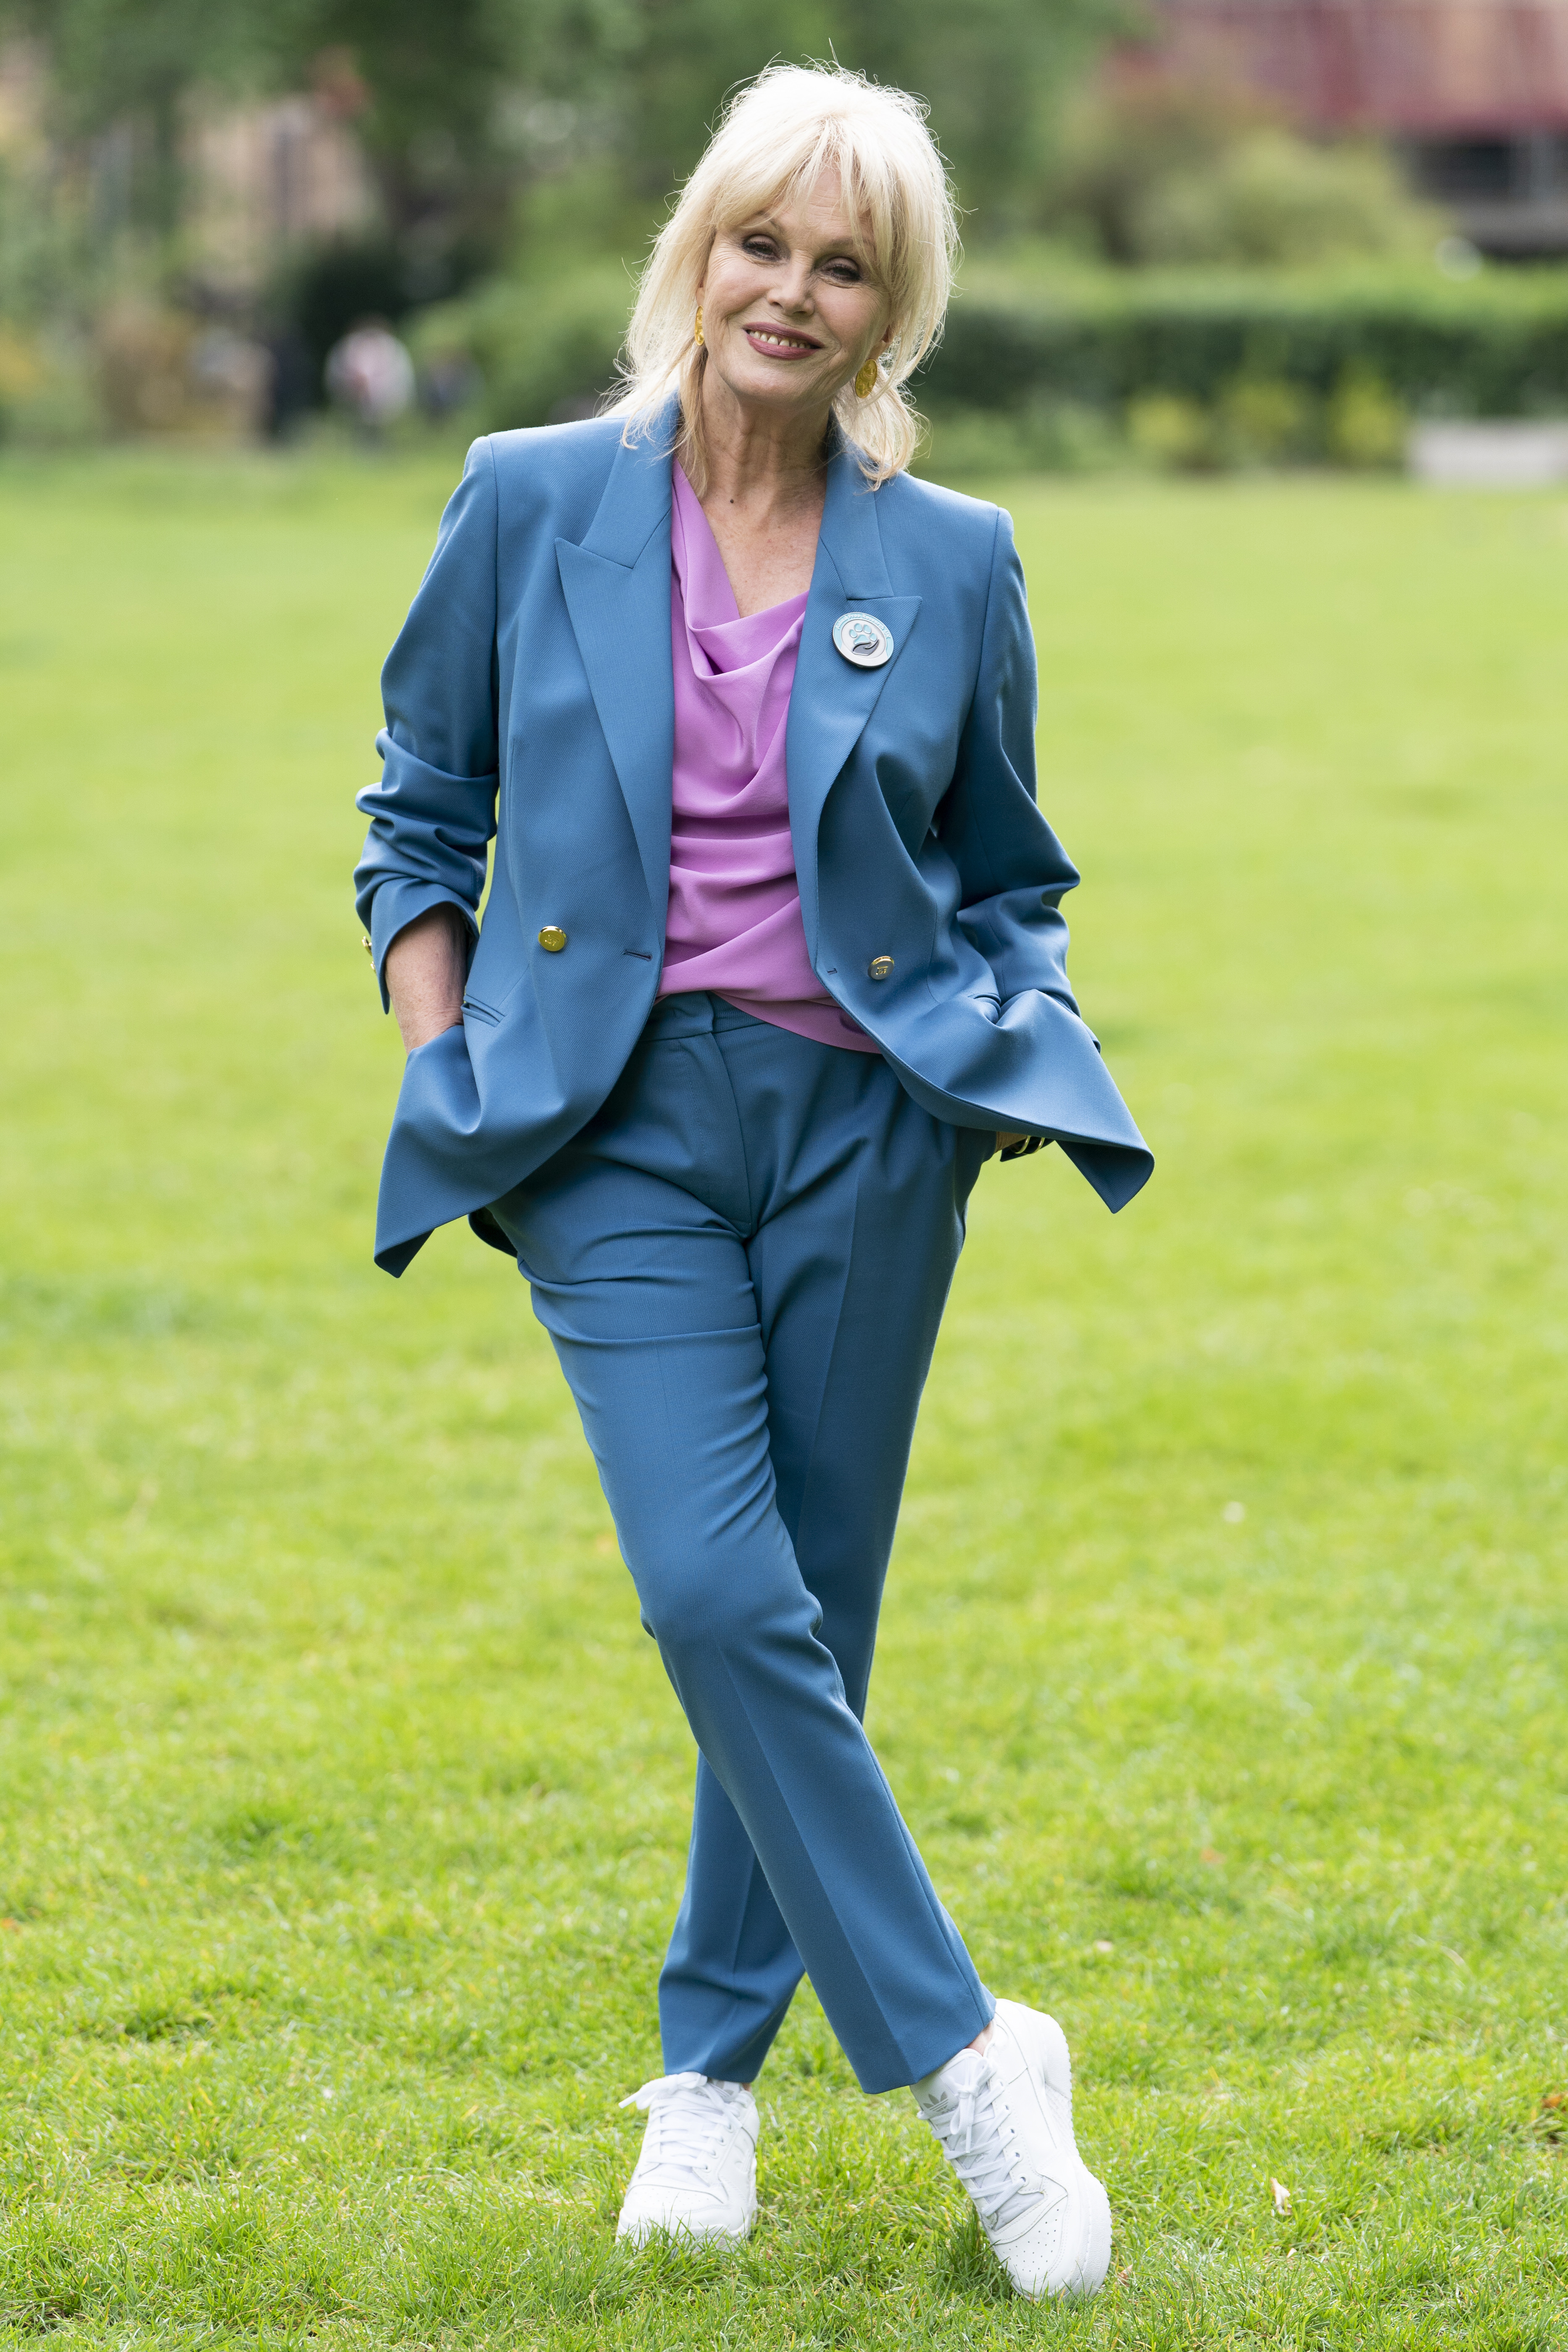 Joanna Lumley poses in Westminster, London, England, on May 23, 2022 | Source: Getty Images